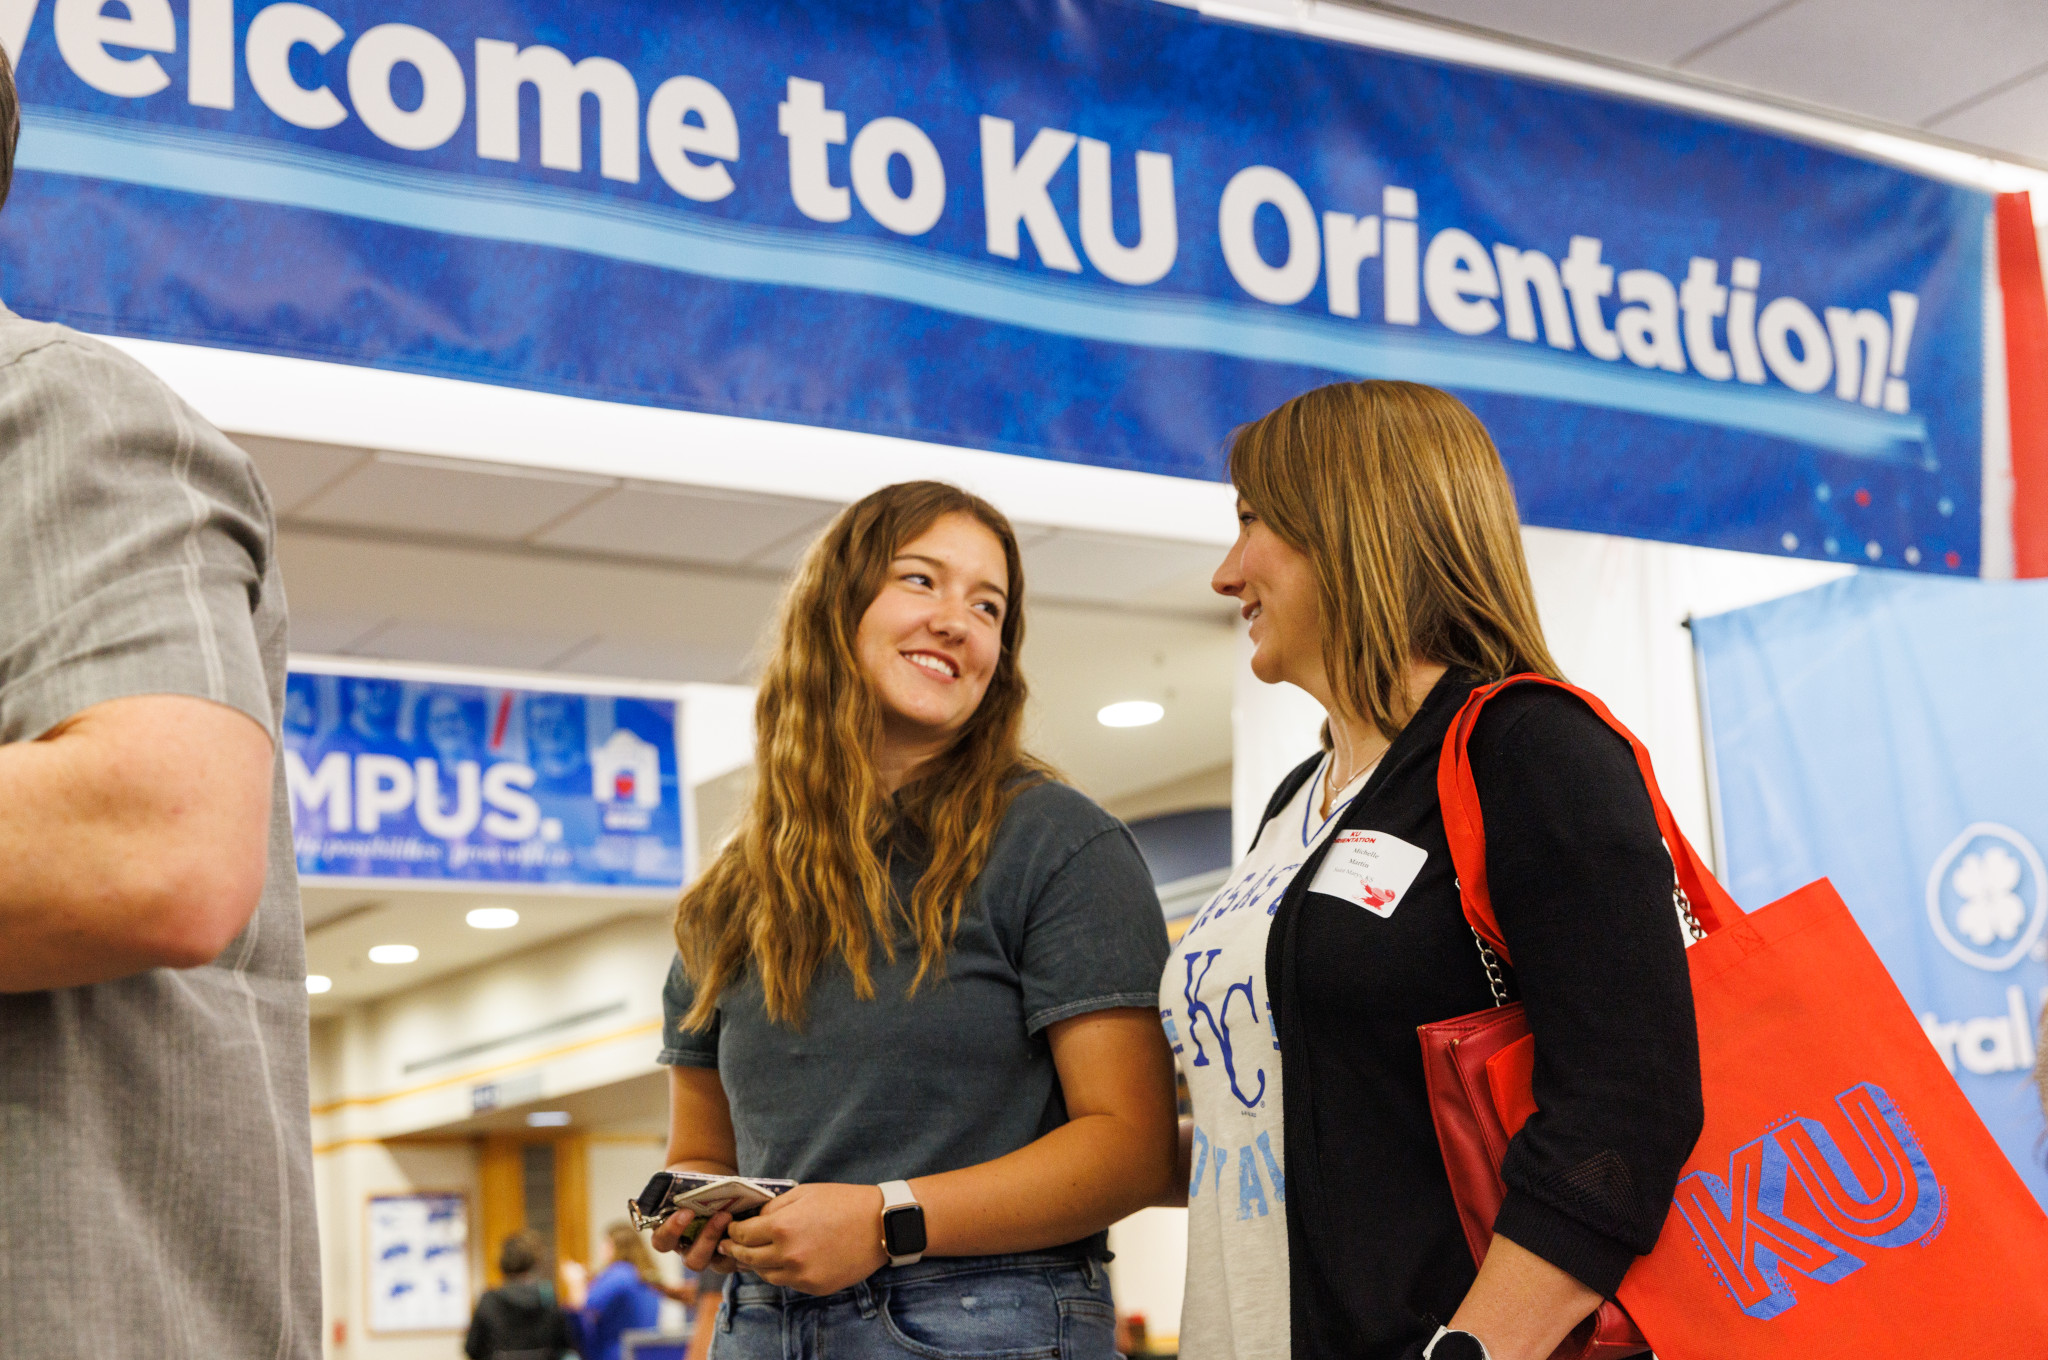 A family happily converses while attending a KU Orientation session.